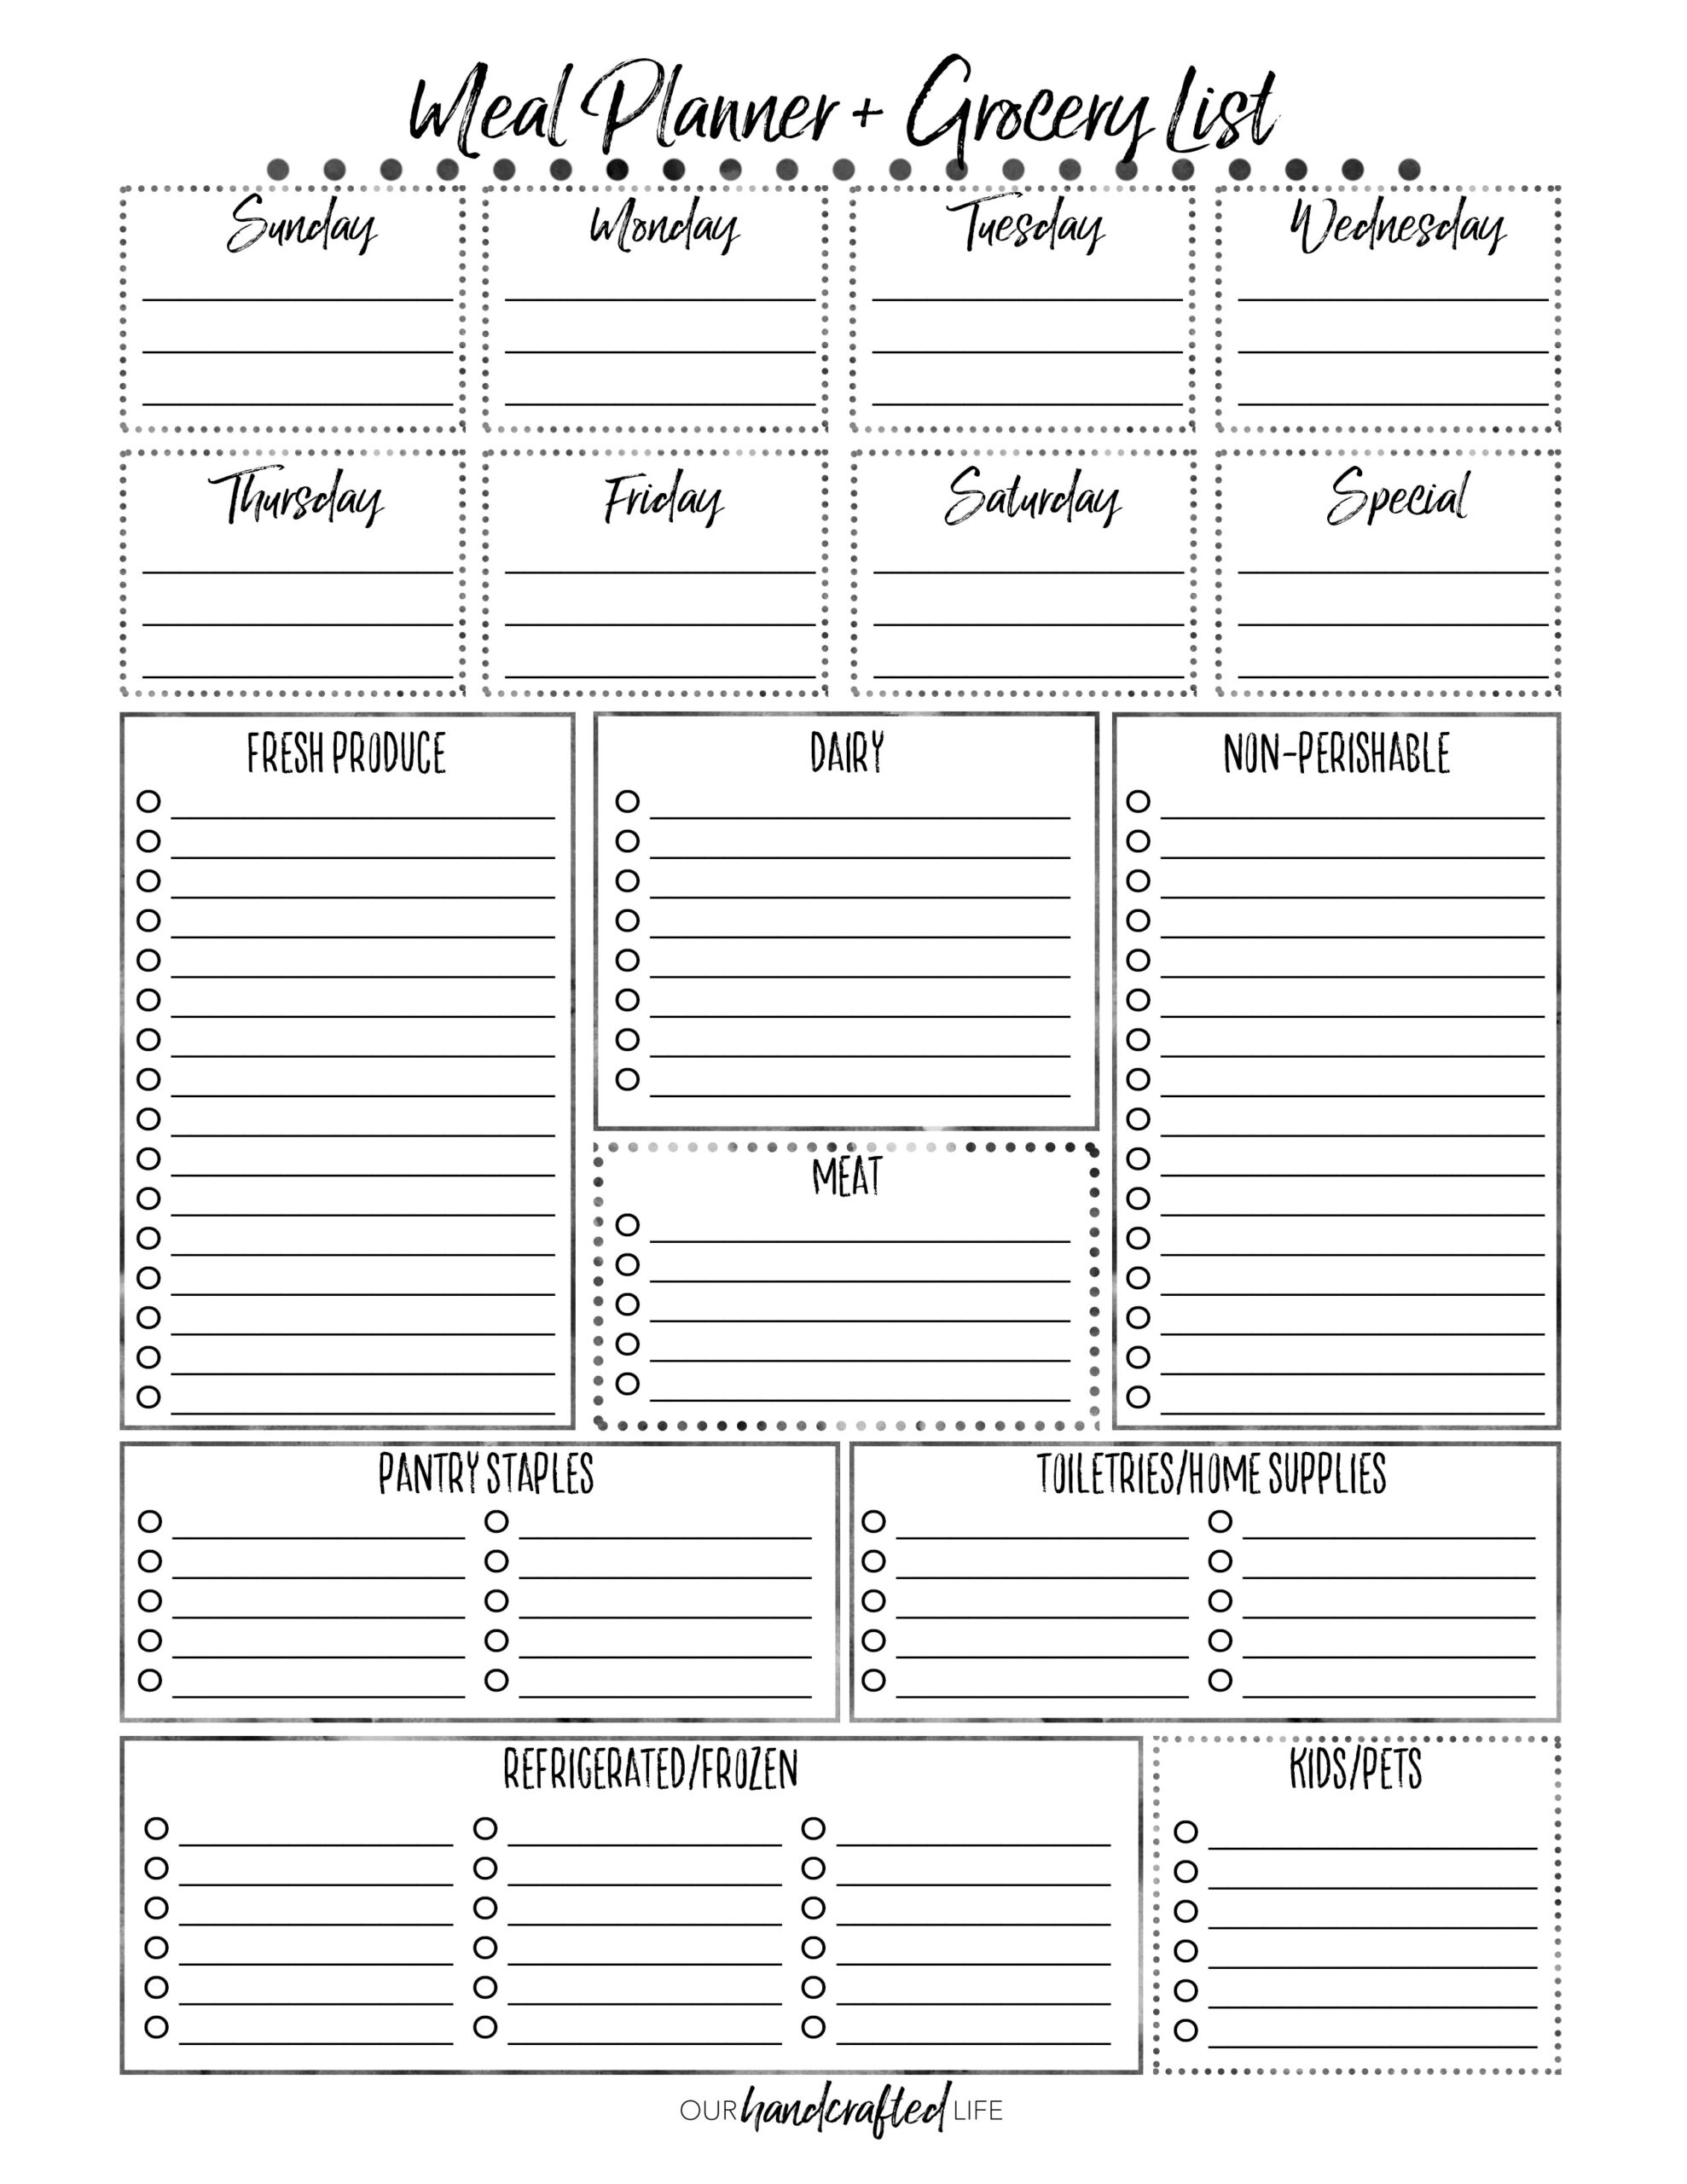 The Most Practical Meal Planner Ever - Our Handcrafted Life - Free Printable Diet Planner